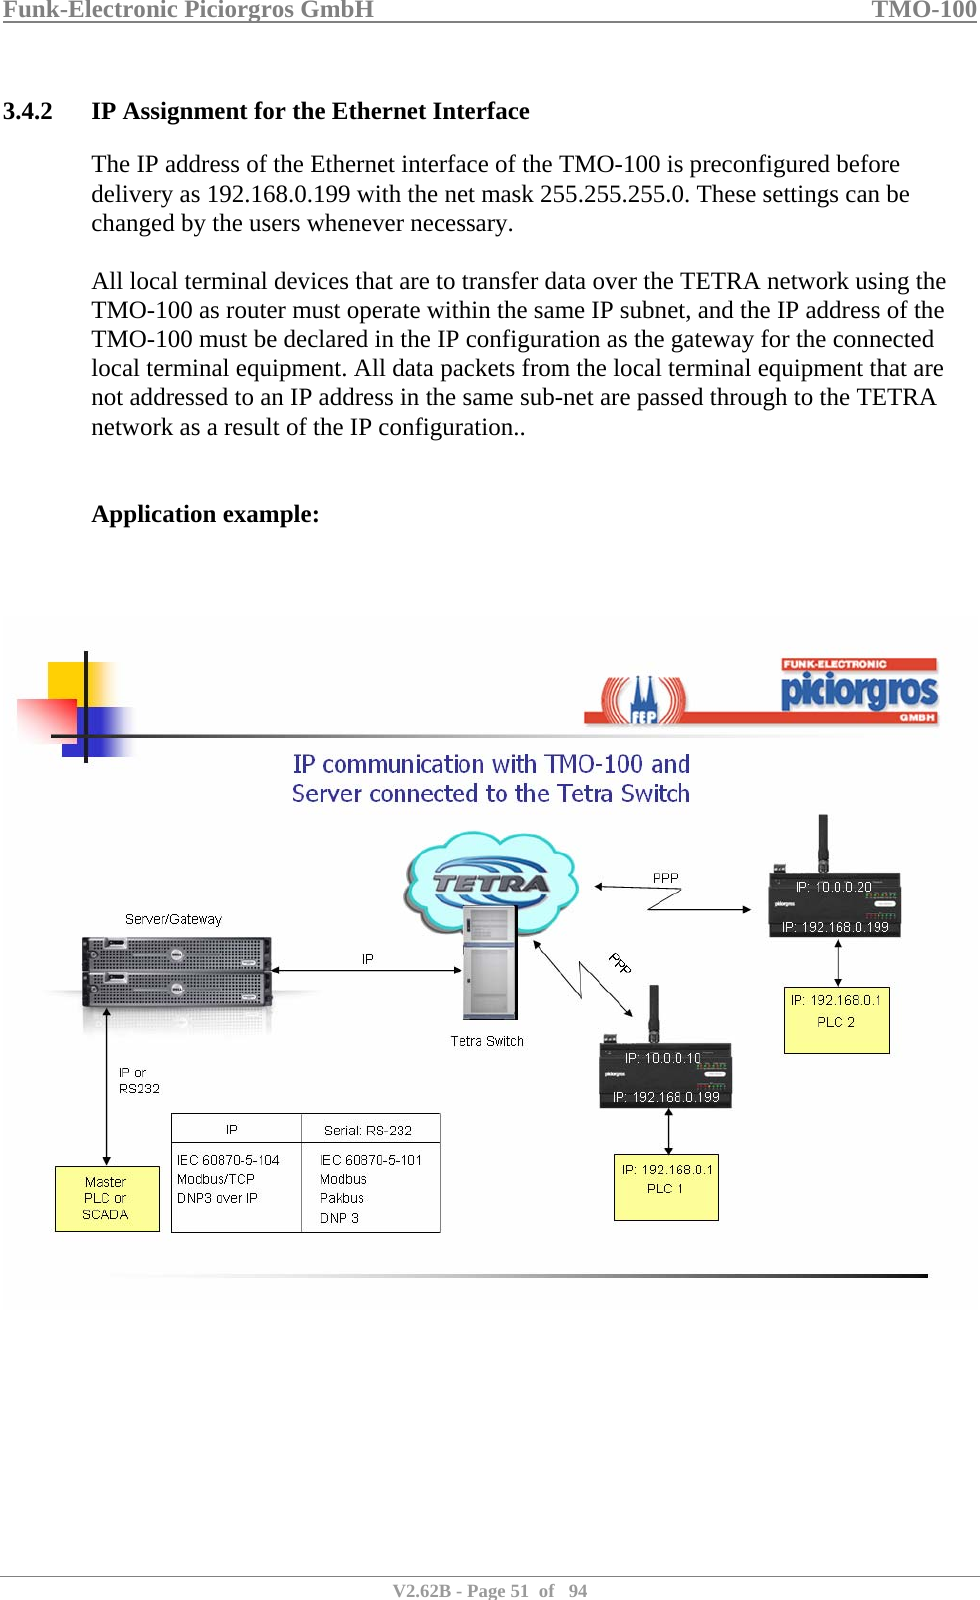 Funk-Electronic Piciorgros GmbH   TMO-100   V2.62B - Page 51  of   94   3.4.2 IP Assignment for the Ethernet Interface The IP address of the Ethernet interface of the TMO-100 is preconfigured before delivery as 192.168.0.199 with the net mask 255.255.255.0. These settings can be changed by the users whenever necessary.   All local terminal devices that are to transfer data over the TETRA network using the TMO-100 as router must operate within the same IP subnet, and the IP address of the TMO-100 must be declared in the IP configuration as the gateway for the connected local terminal equipment. All data packets from the local terminal equipment that are not addressed to an IP address in the same sub-net are passed through to the TETRA network as a result of the IP configuration..   Application example:      